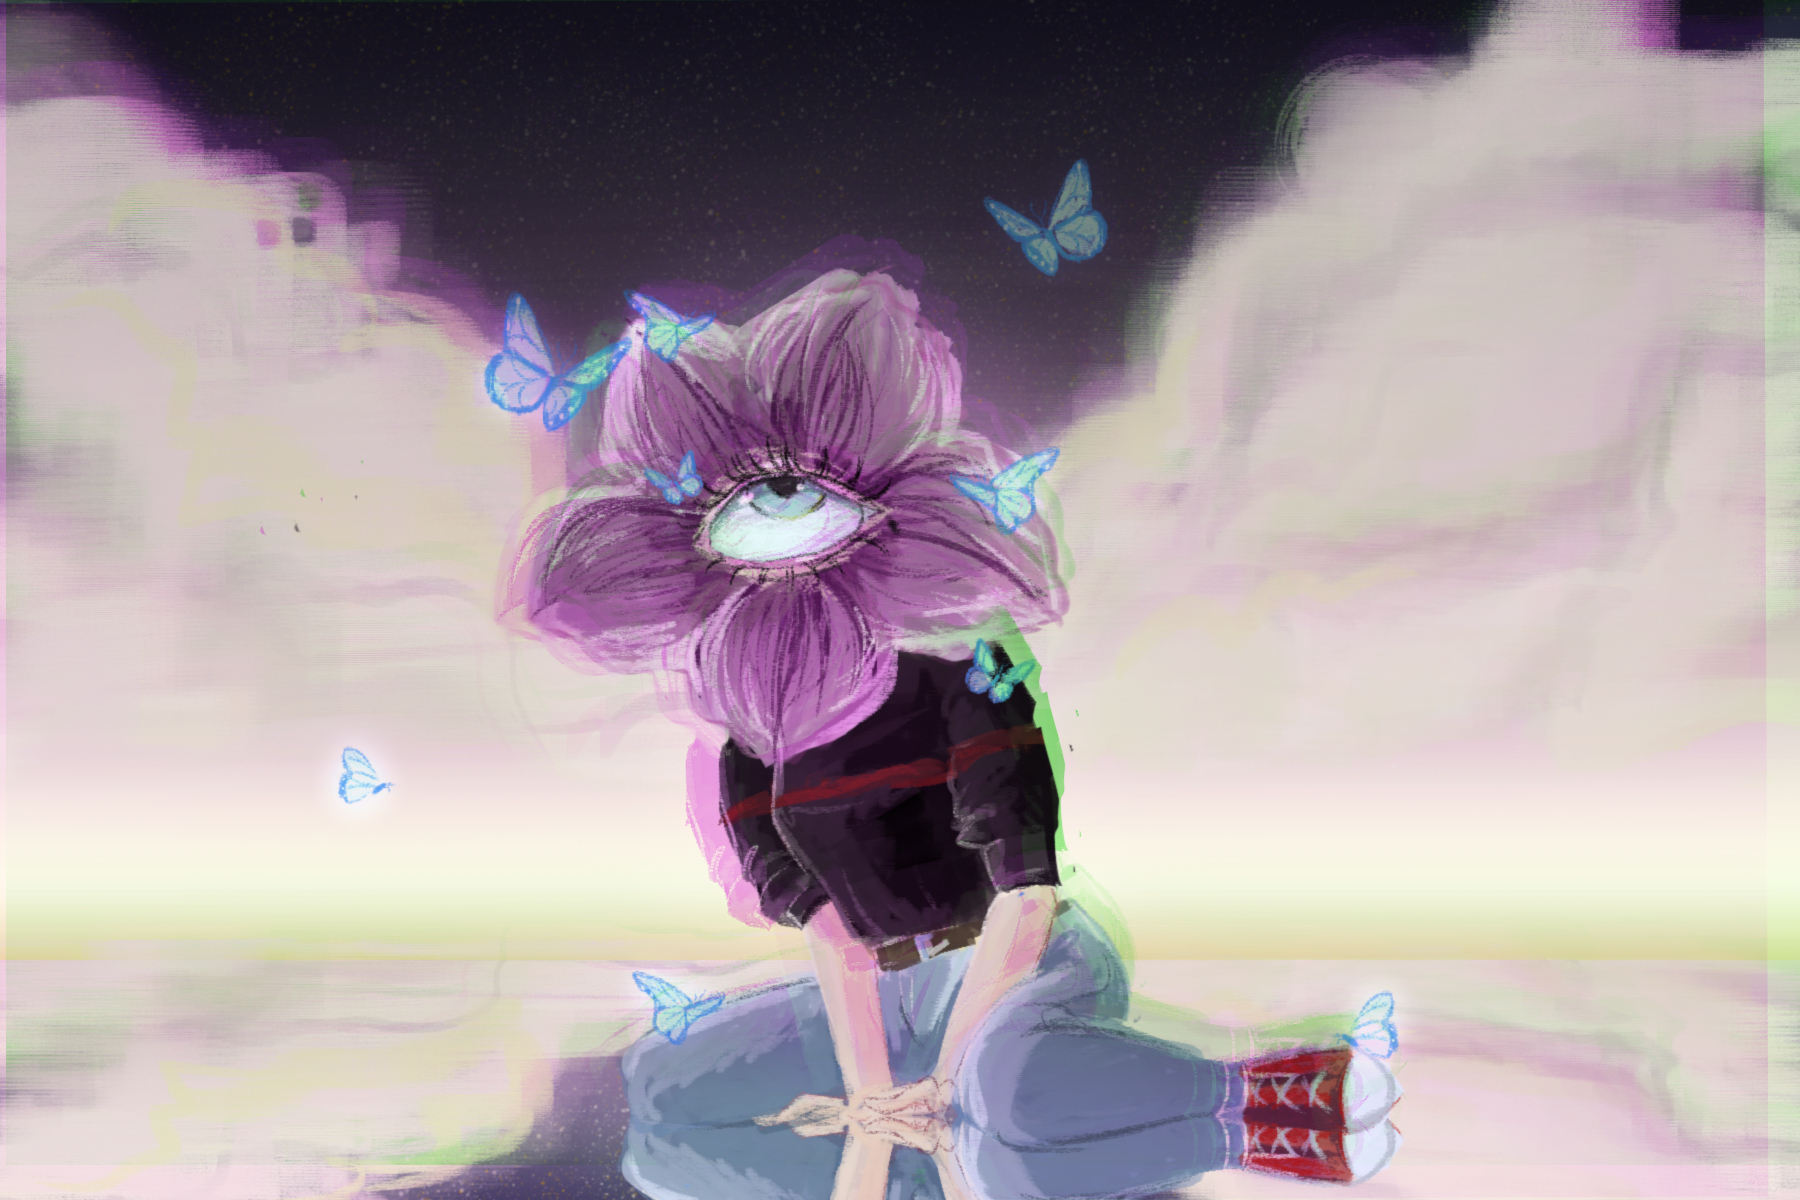 illustration of a flower with an eyeball and butterflies in an article about Dreamcore